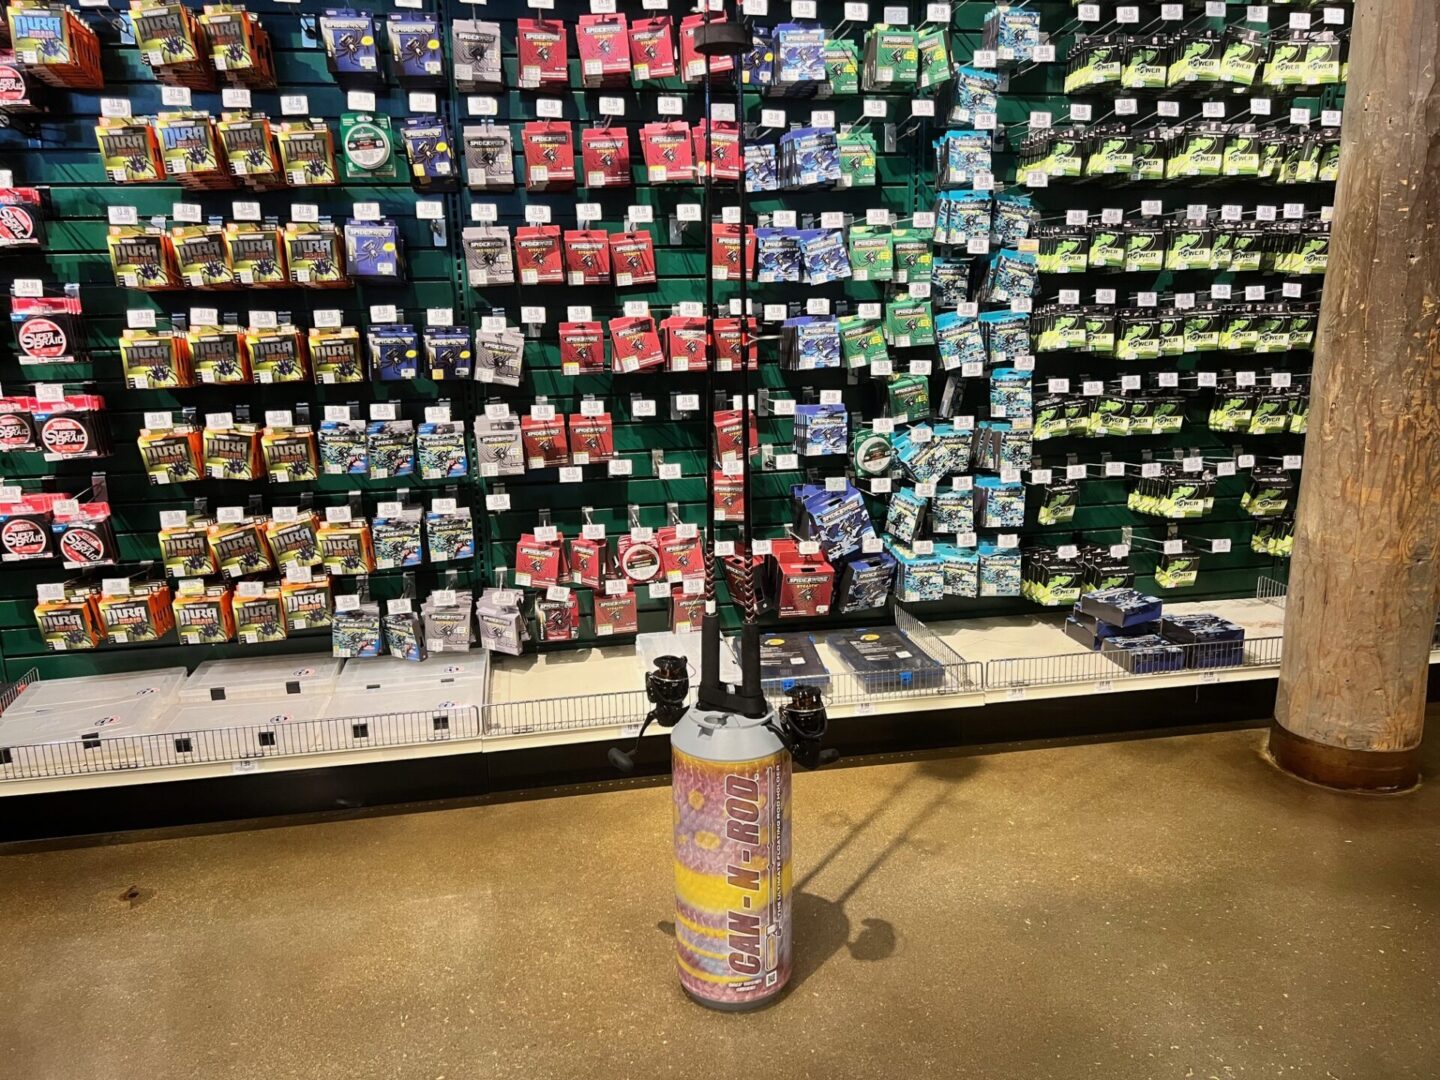 A soda can sitting in front of a wall full of drinks.